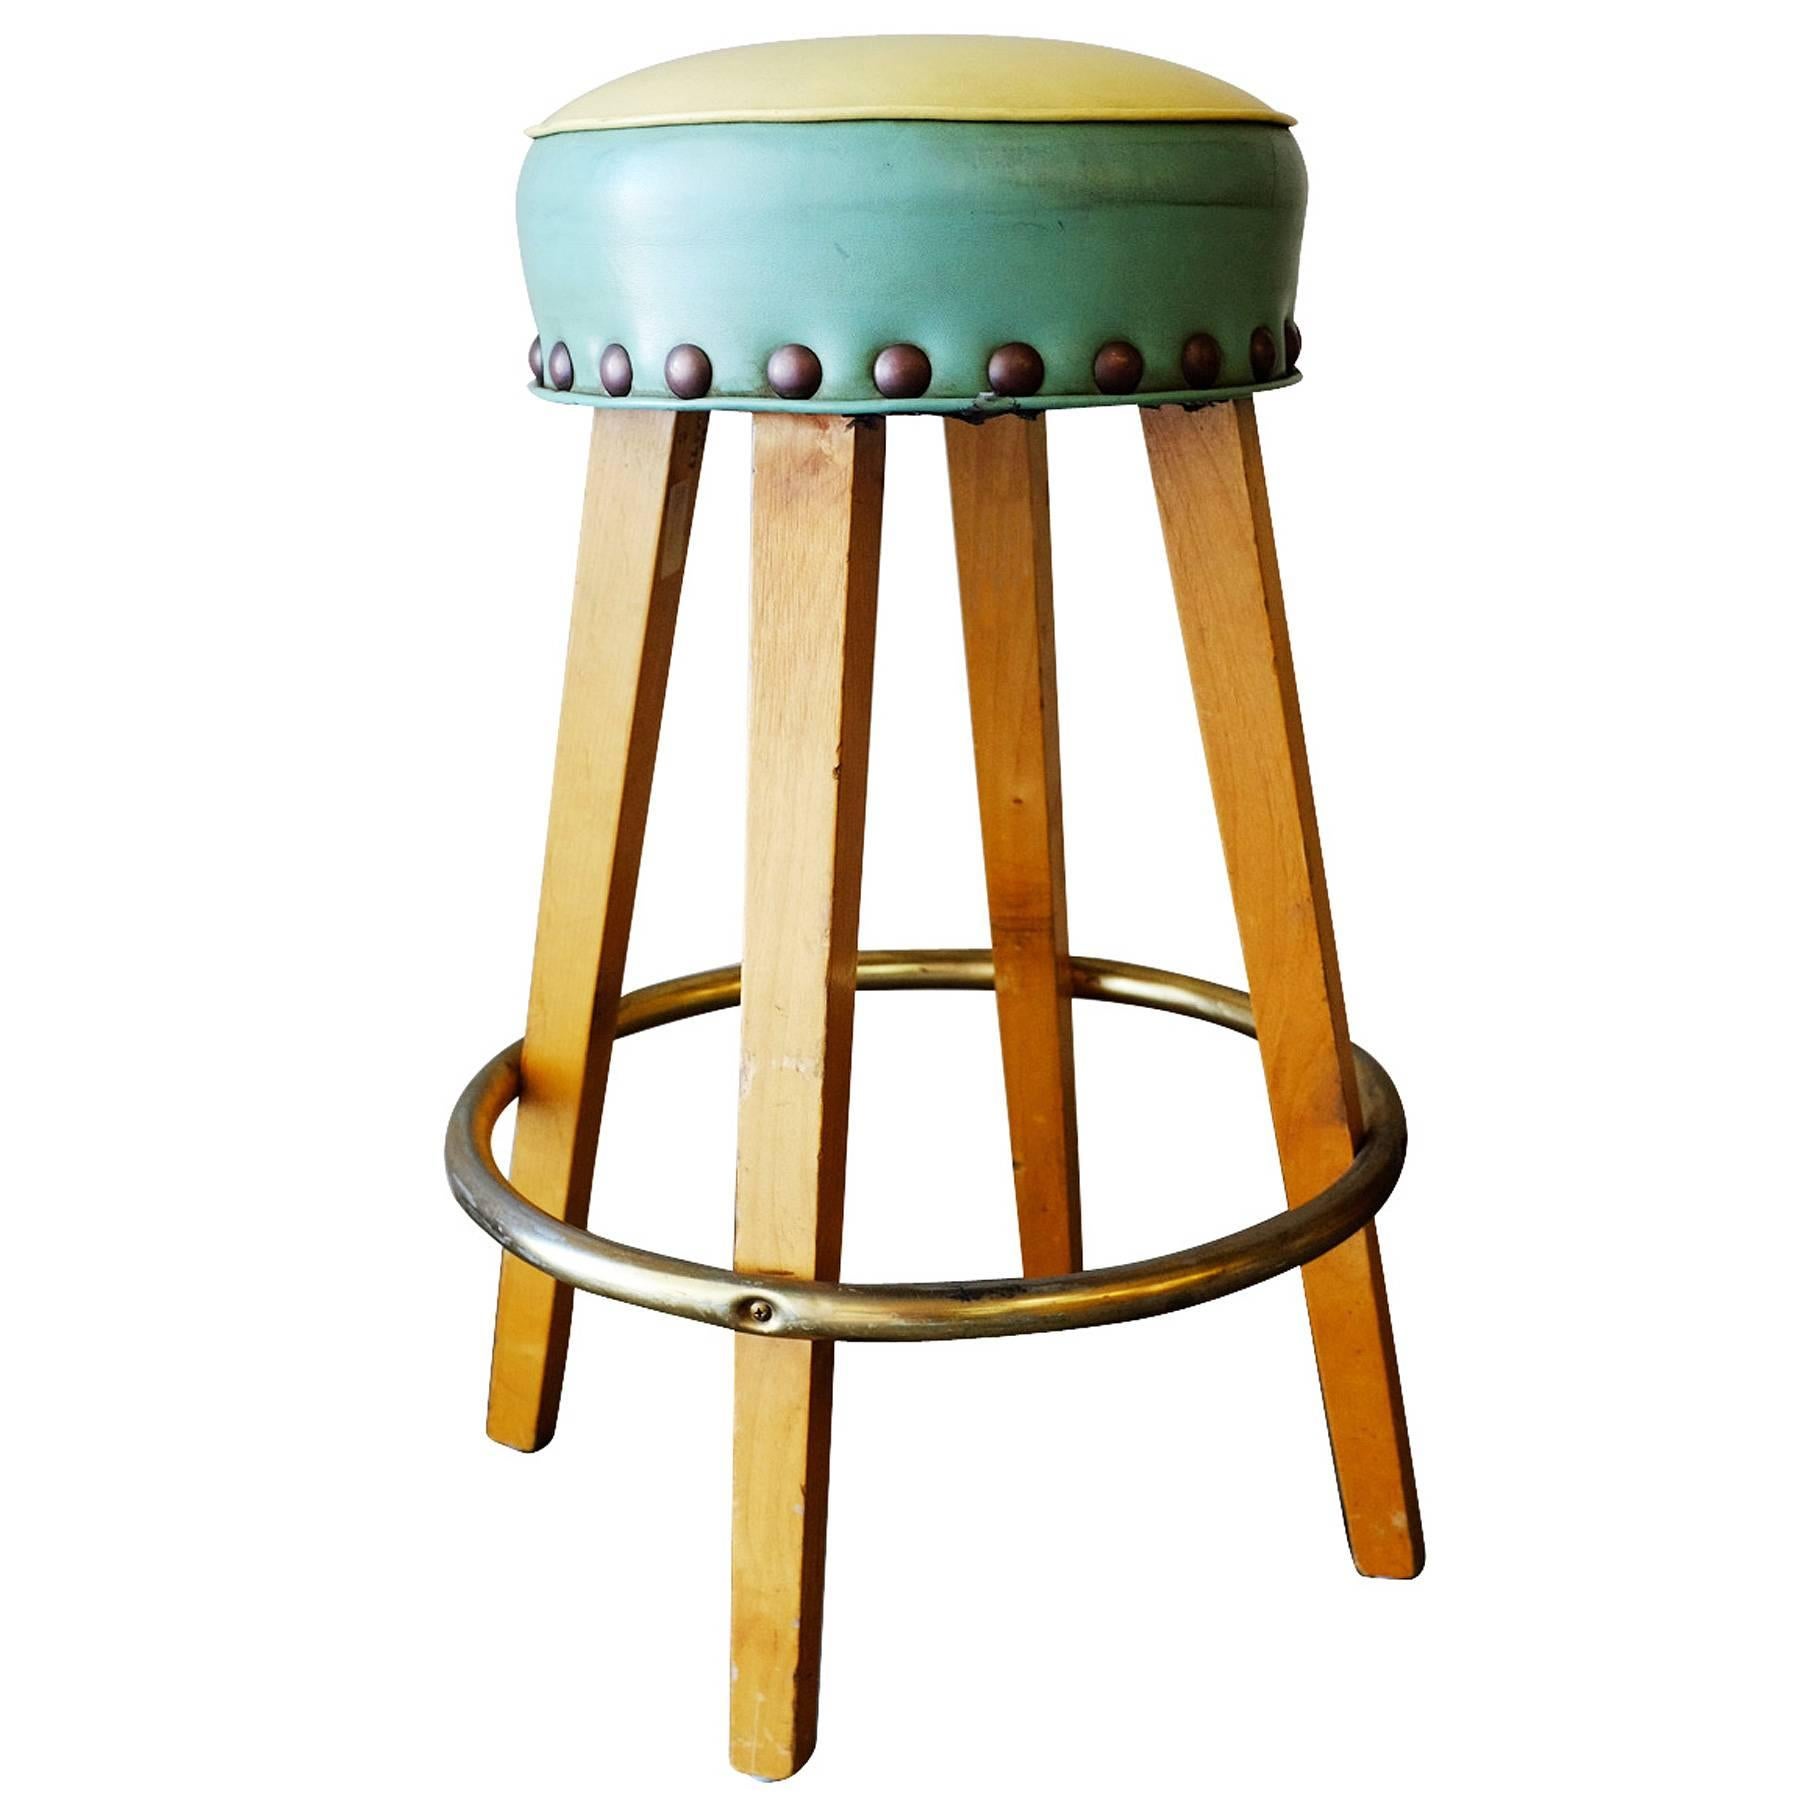 Set of 4 custom handmade midcentury bar stools with tapered oak legs, a round brass footrest that connects to turquoise and soft yellow colored Naugahyde seats. Each seat has wraparound oversized nailhead accents.

